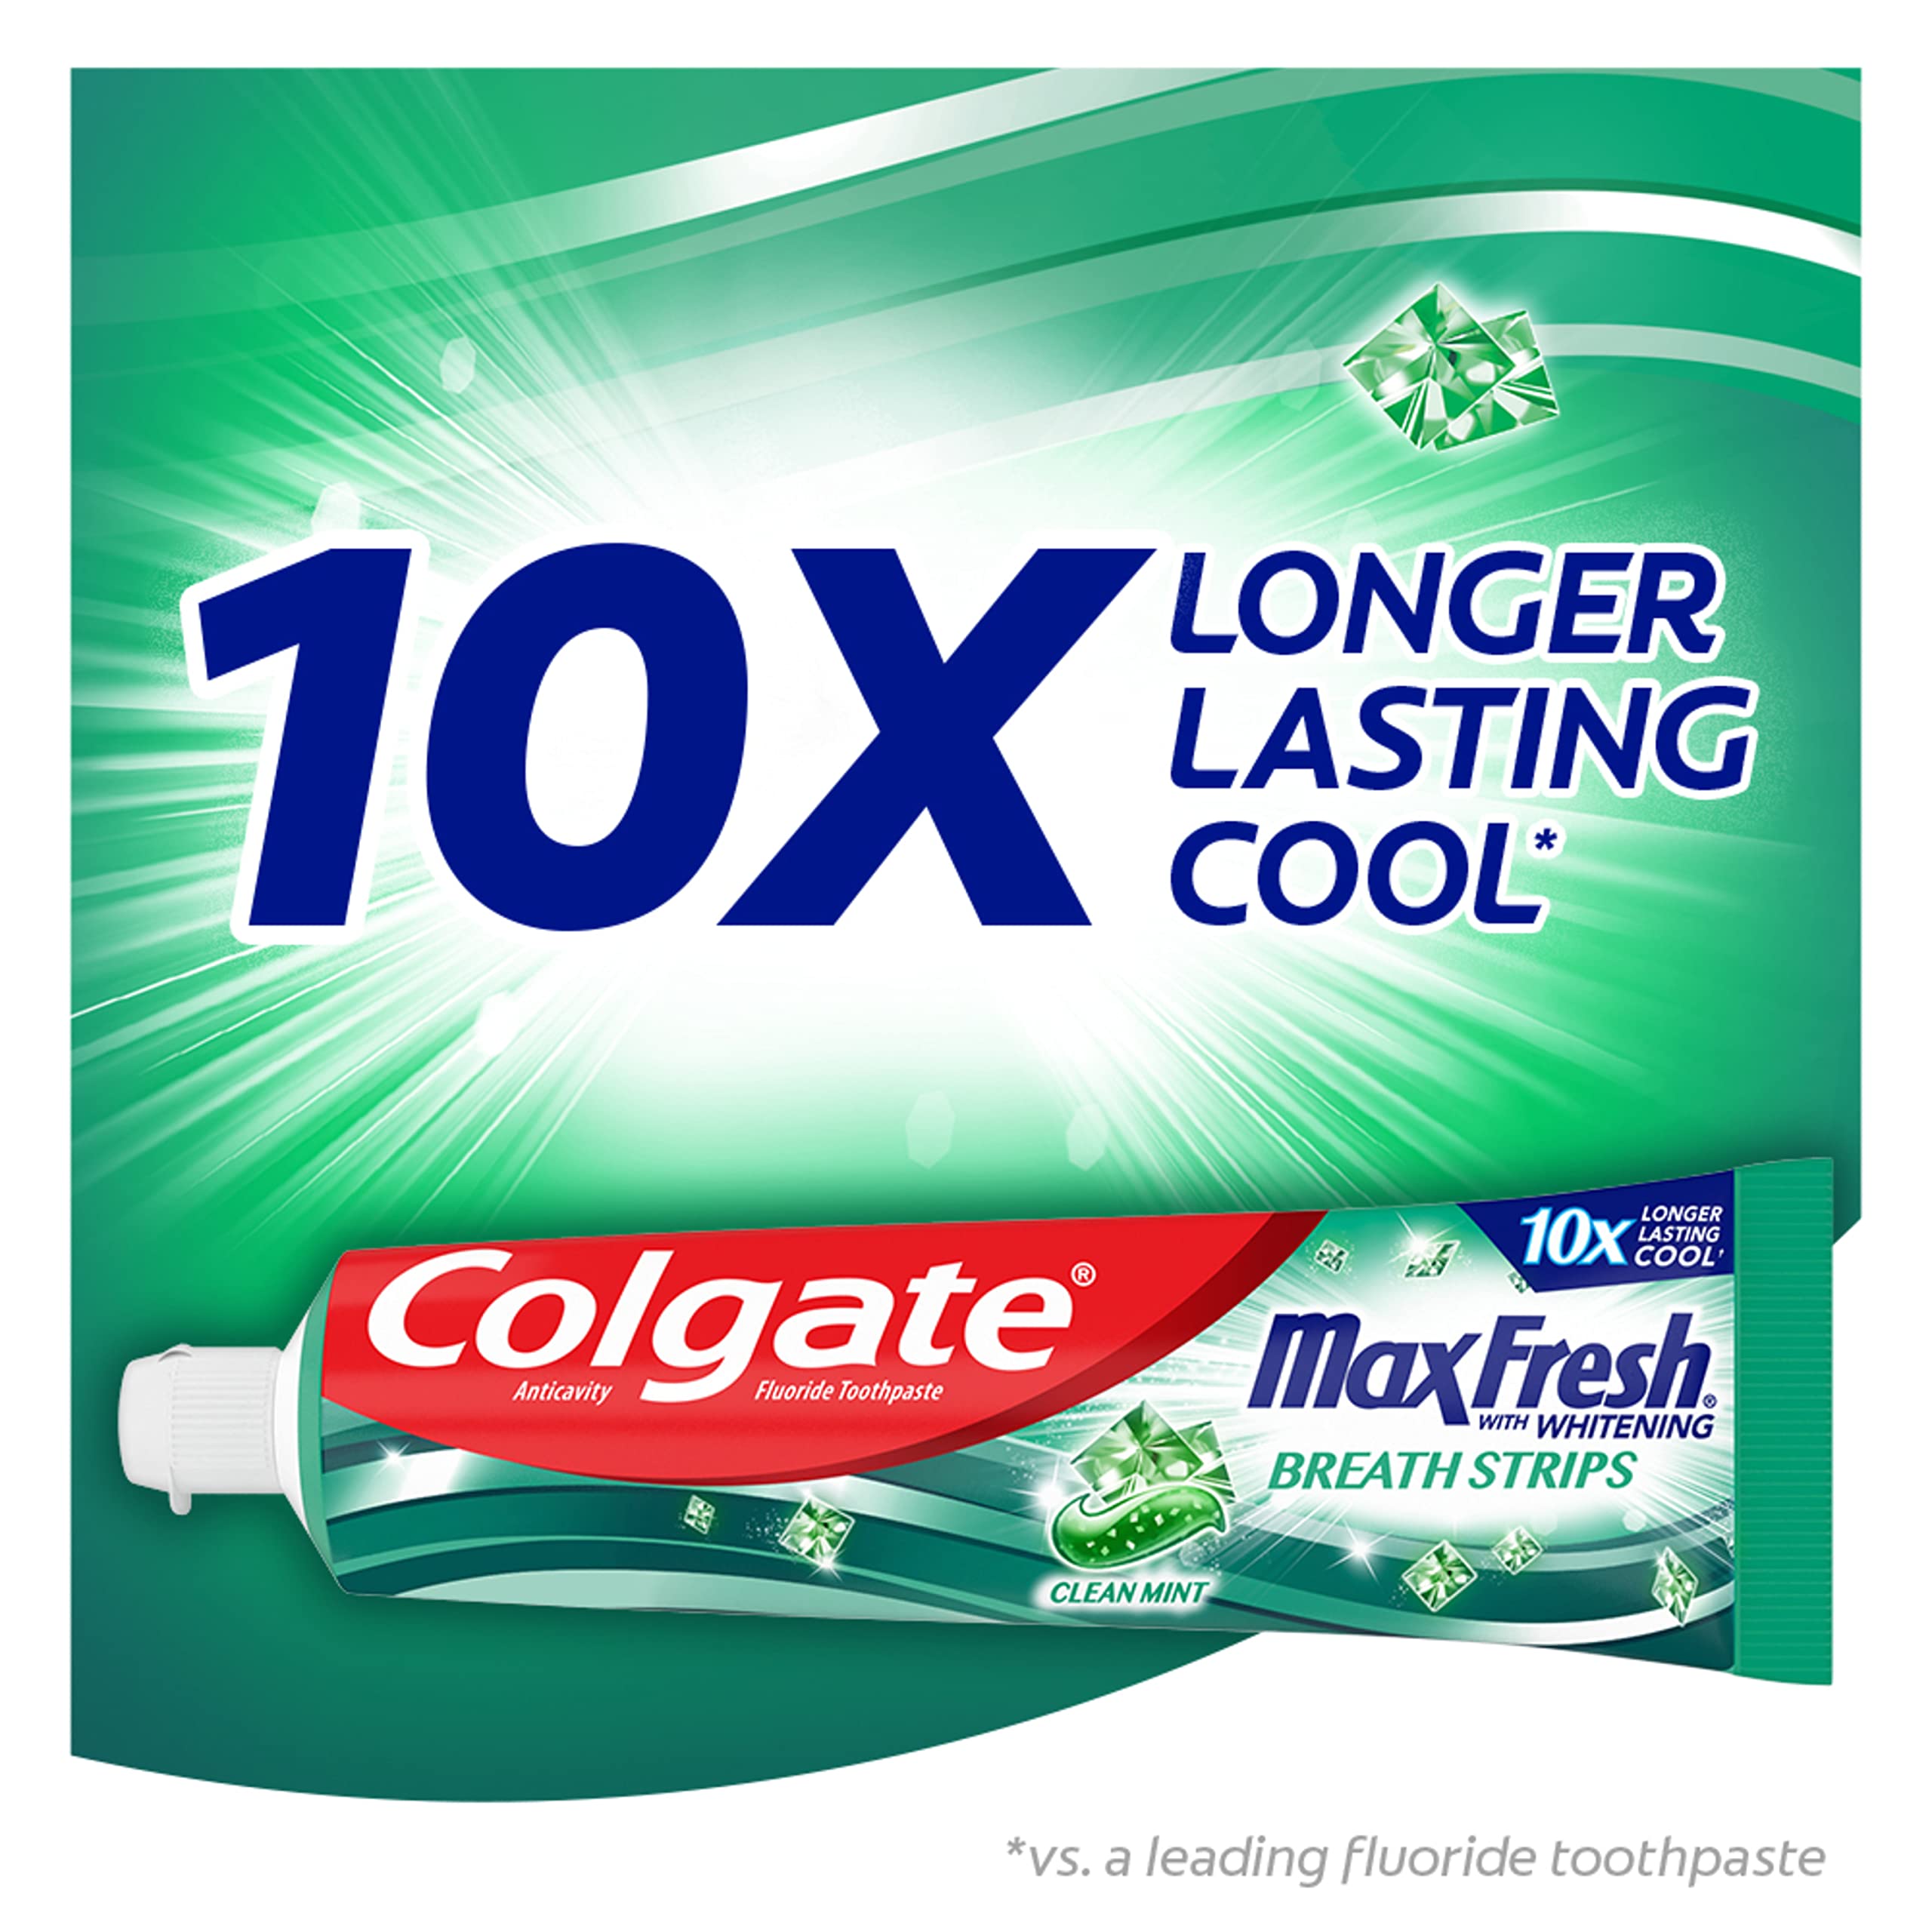 Colgate Max Fresh Toothpaste, Whitening Toothpaste with Mini Breath Strips, Clean Mint Toothpaste for Bad Breath, Helps Fight Cavities, Whitens Teeth, and Freshens Breath, 4 Pack, 6.3 Oz Tubes